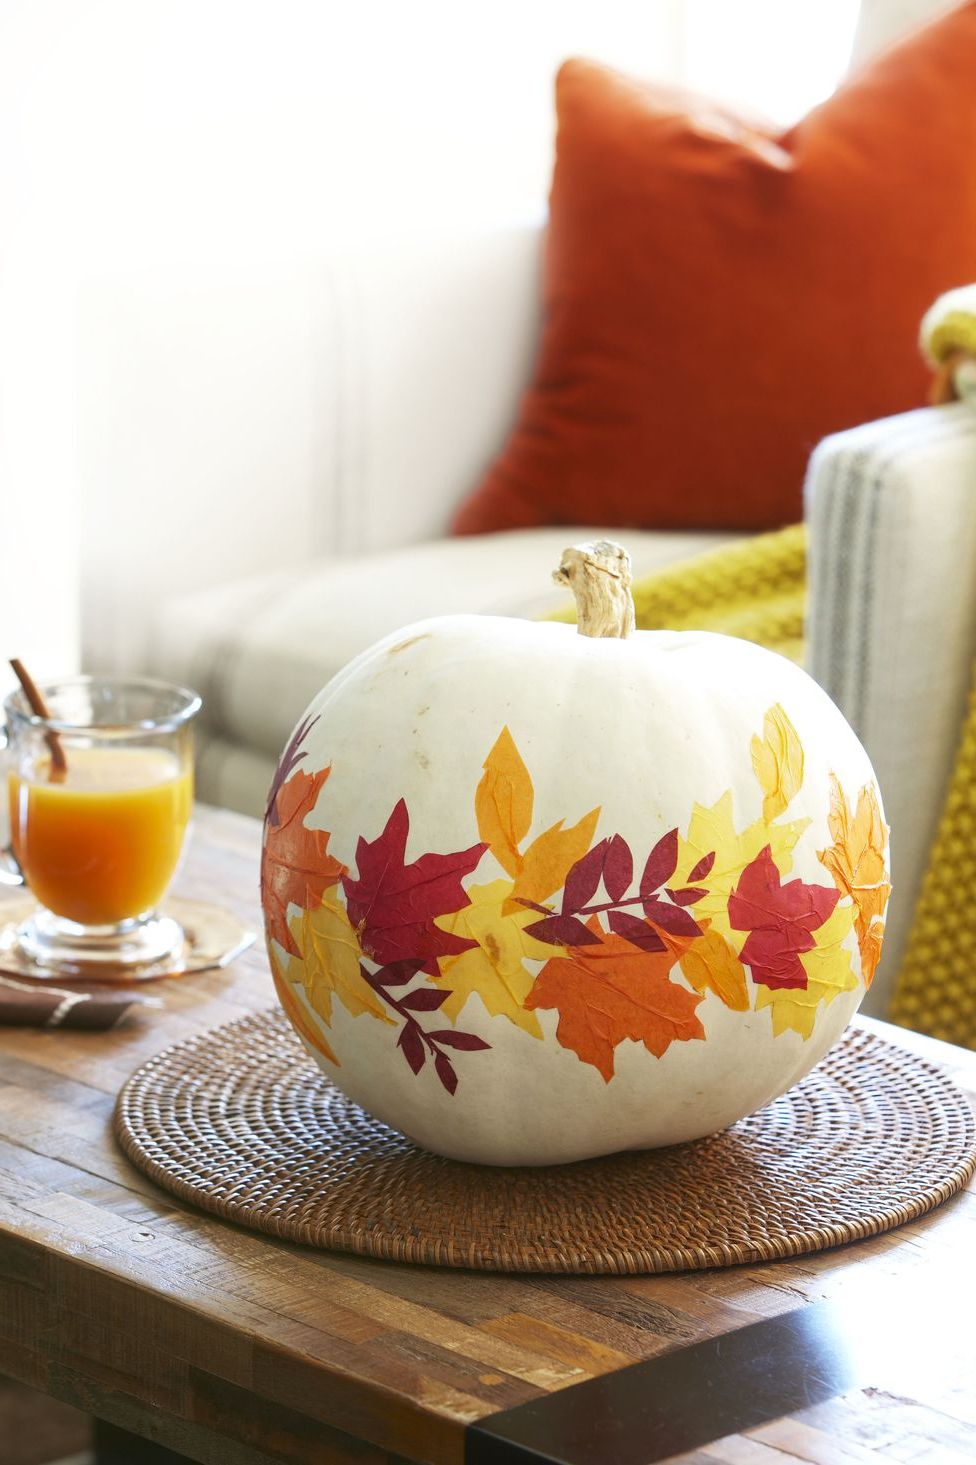 Fall Craft Inspiration {Round Up} - Our Southern Home